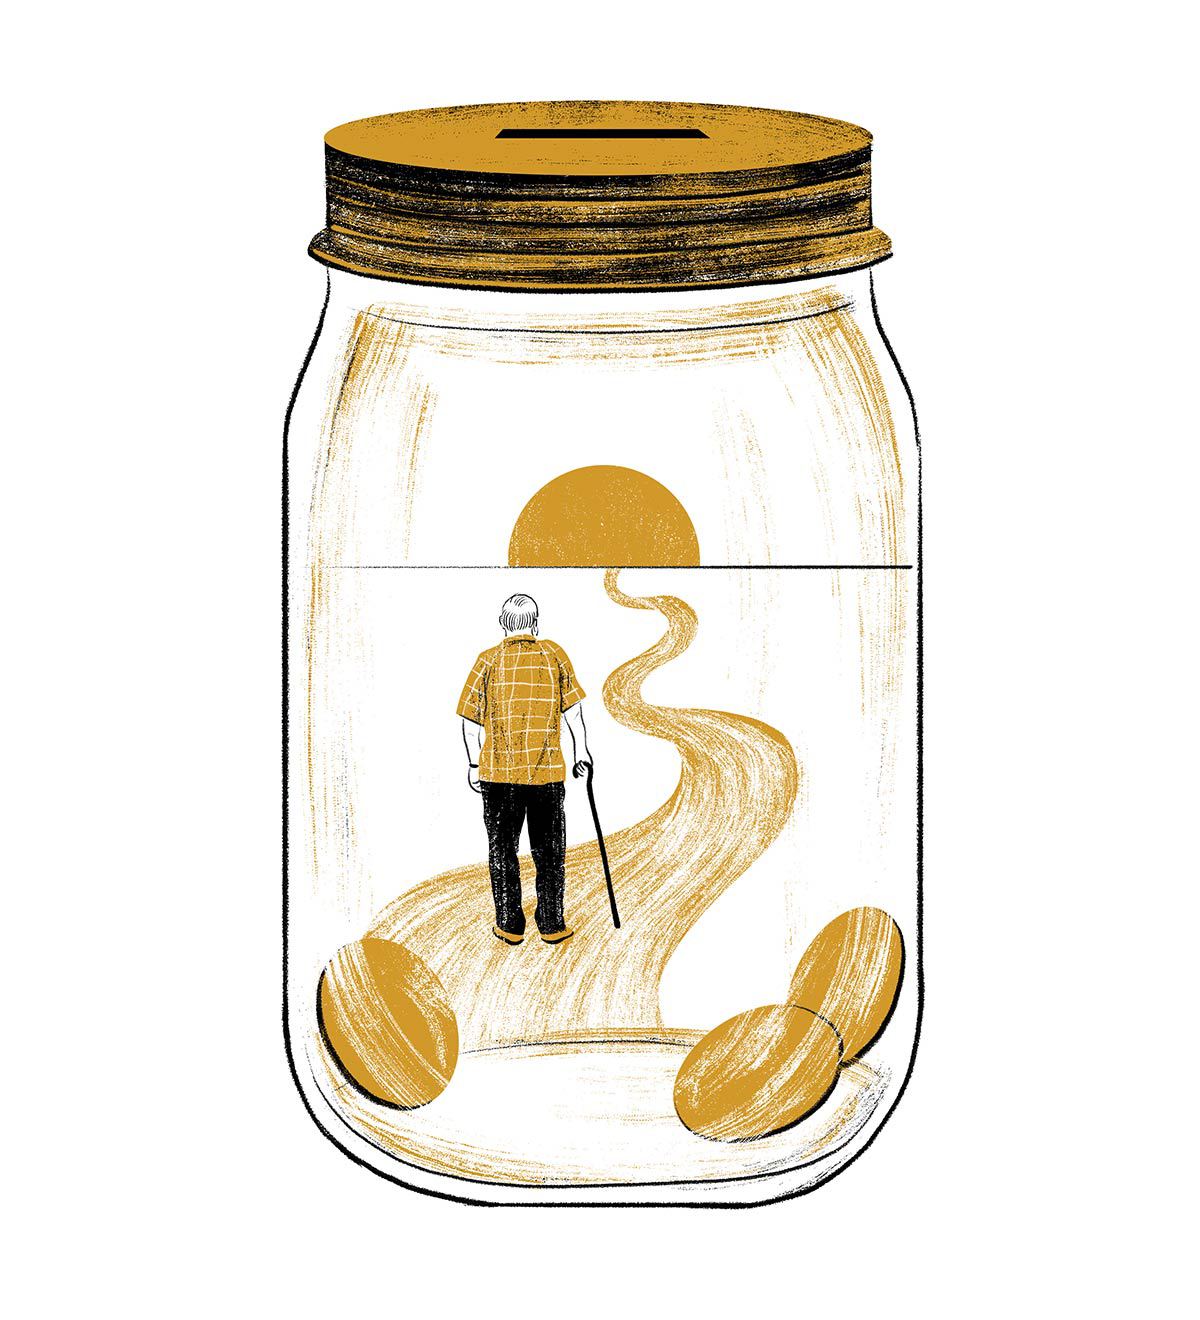 An illustration of an elderly man walking along a path towards a coin that looks like a sunset while inside a glass savings jar. 